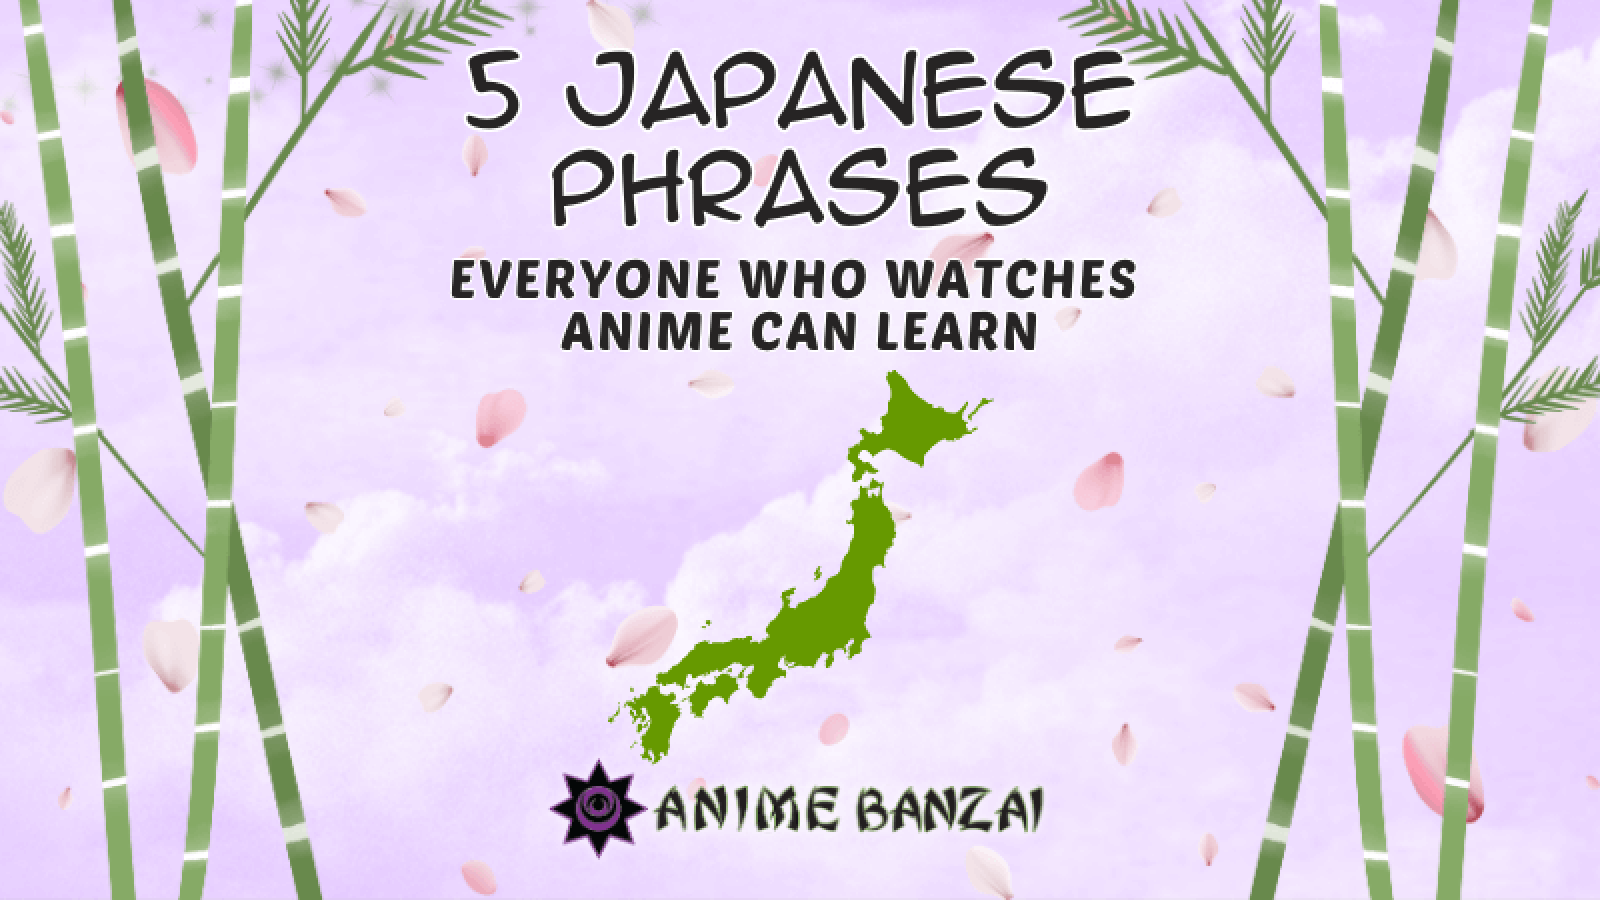 Title card for: "5 Japanese Phrases Everyone Who Watches Anime Can Learn"